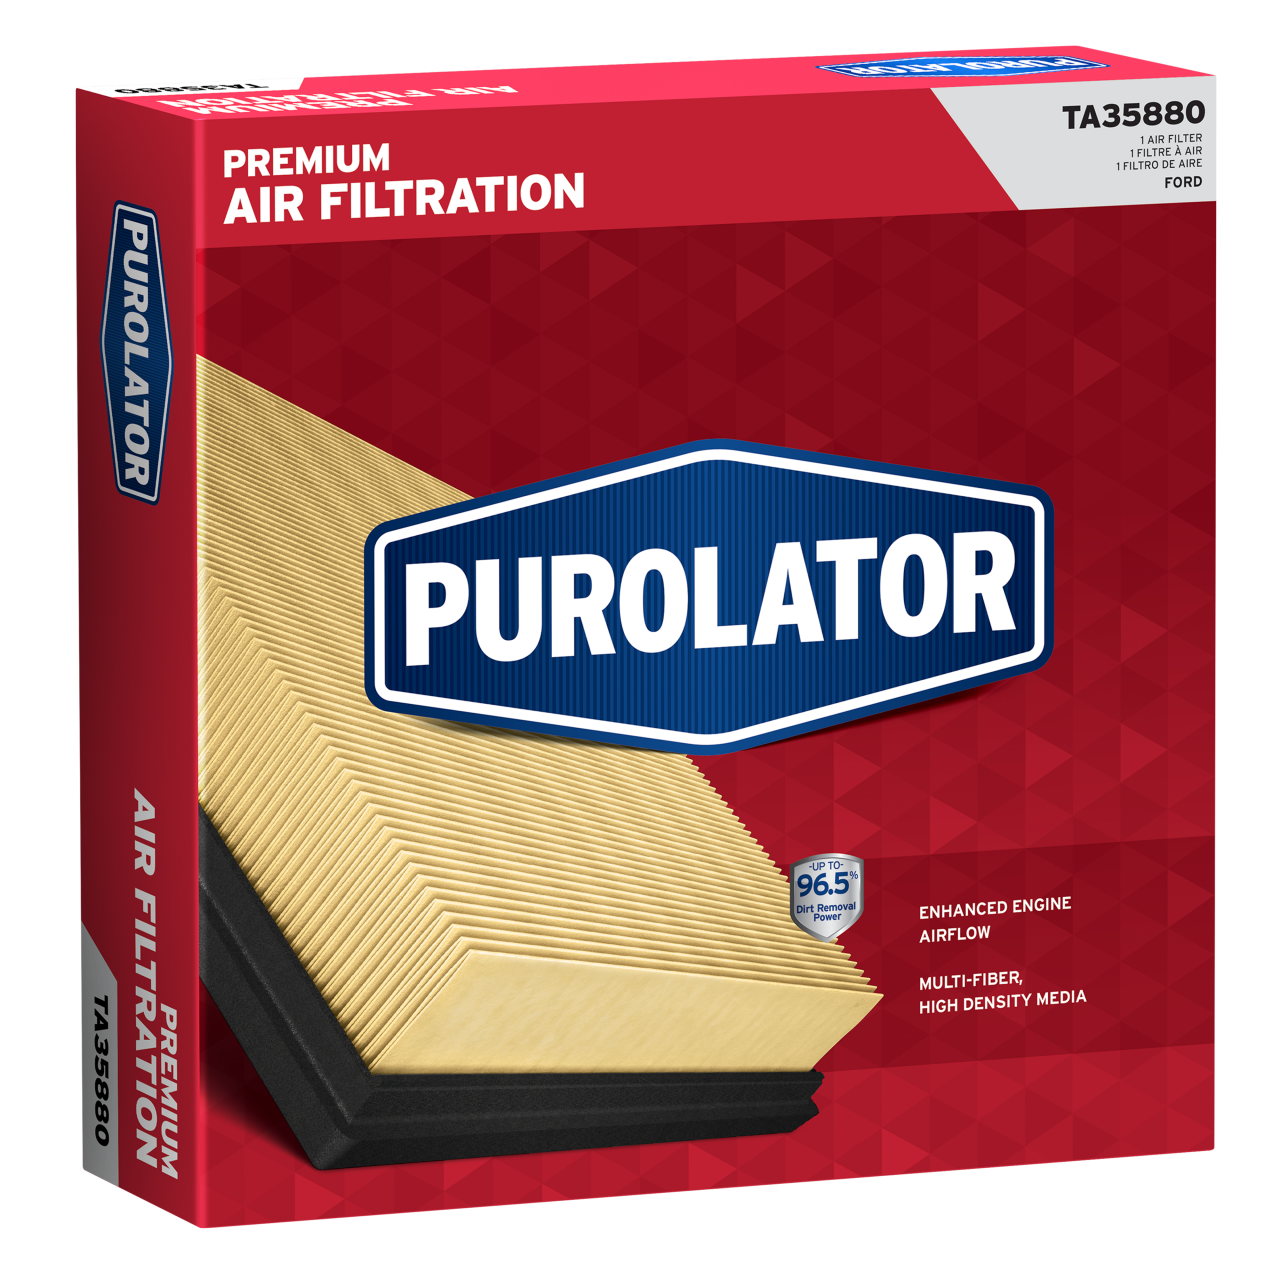 Protect your vehicle by replacing your air filter with a Purolator Air Filter for premium air filtration.